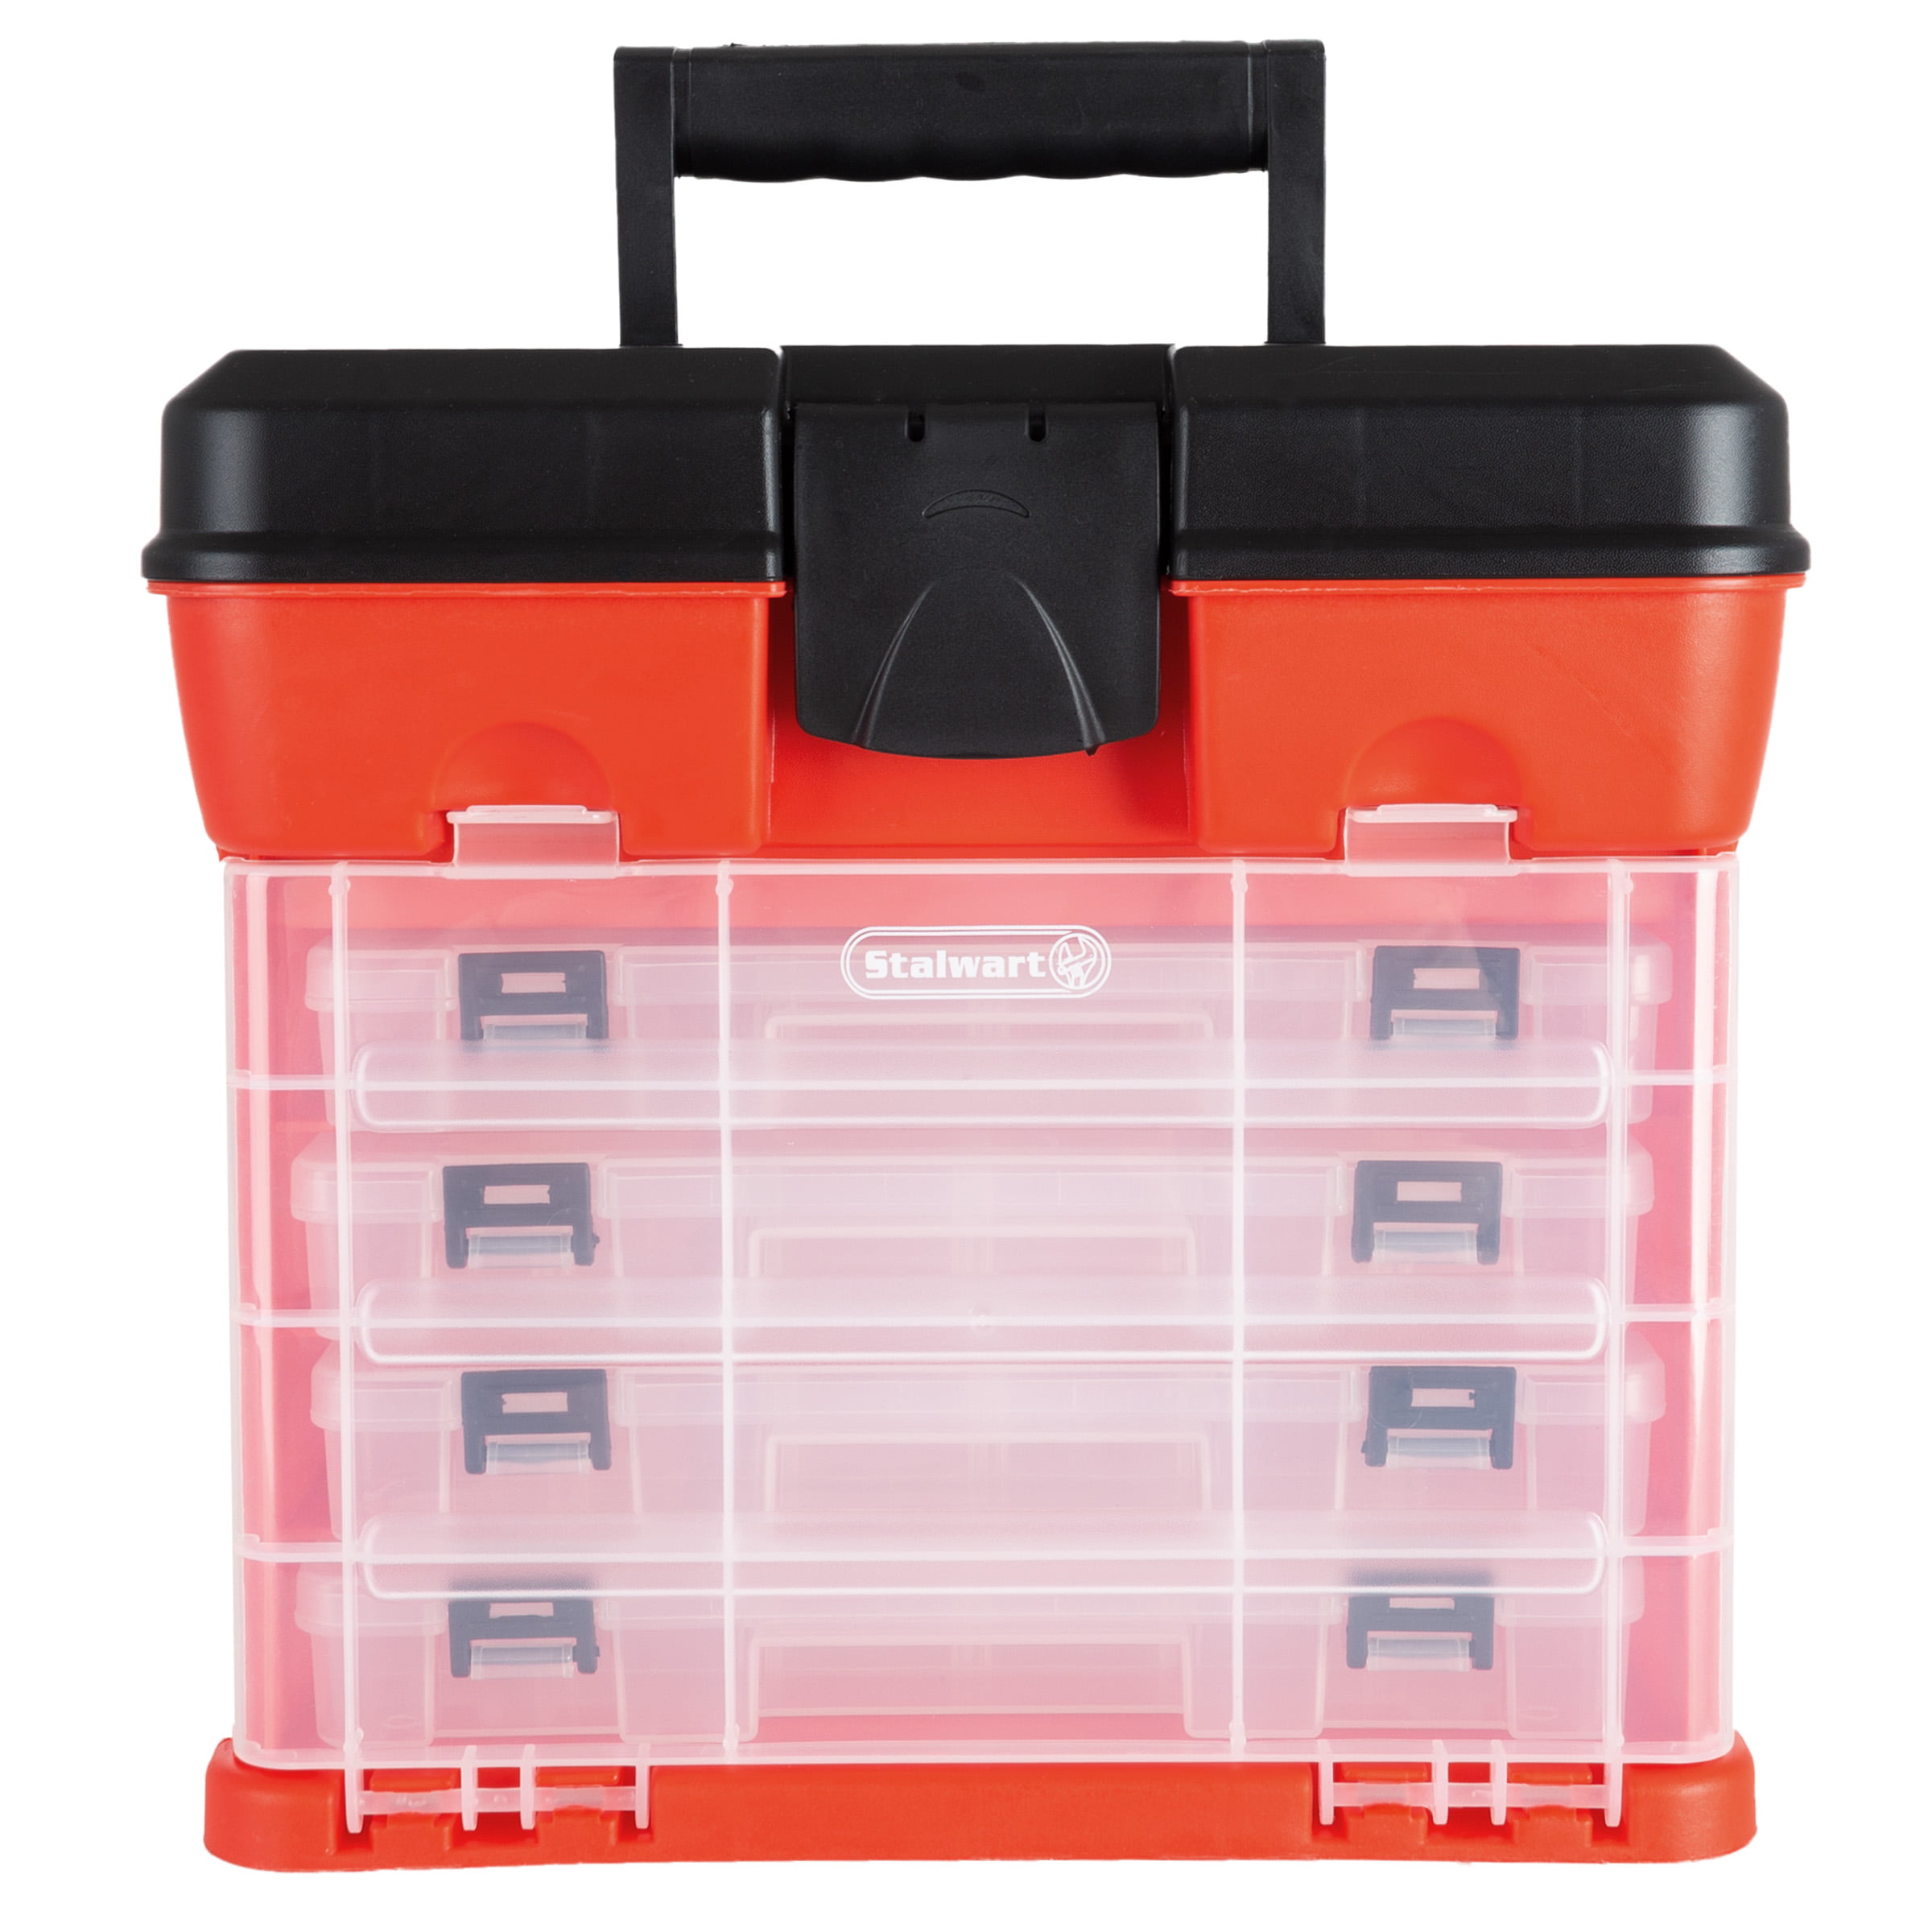 Storage Tool Box - Portable Multipurpose Organizer With Main Top  Compartment and 4 Removable Multi-Compartment Trays by Stalwart